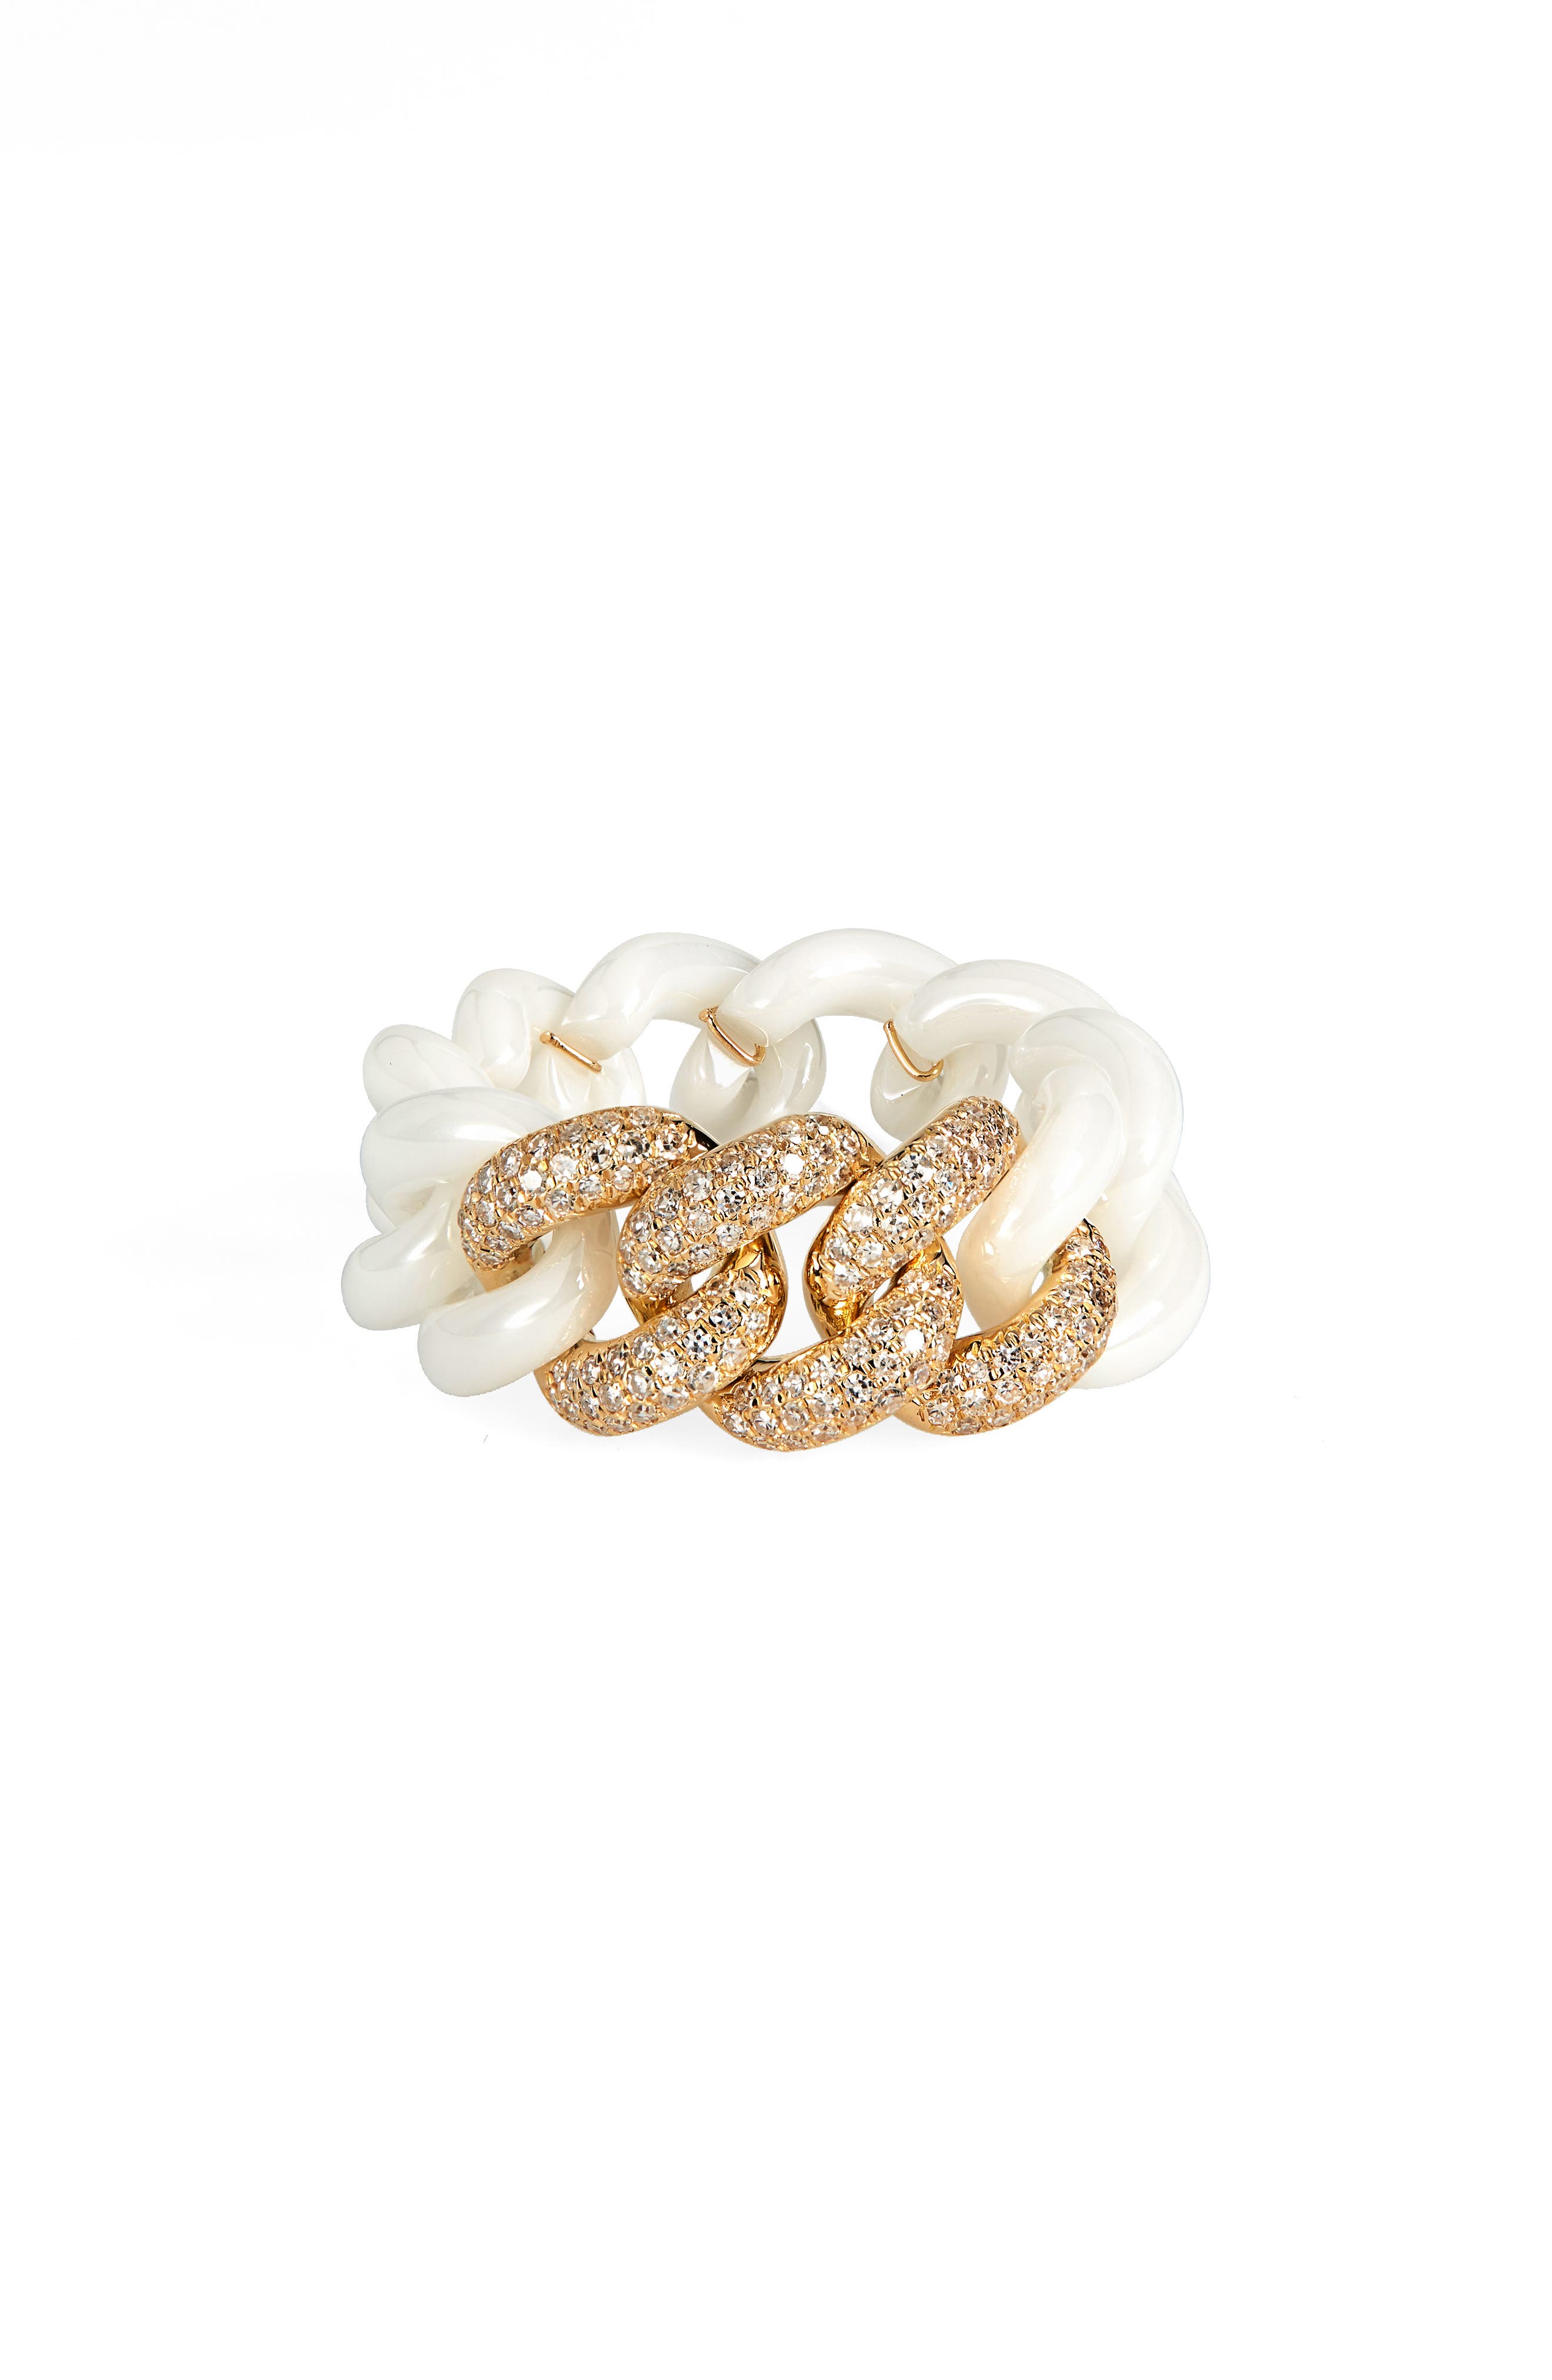 SHAY Pave Diamond & Ceramic Chain Link Ring in 18K Yellow Gold at Nordstrom, Size 7 Us